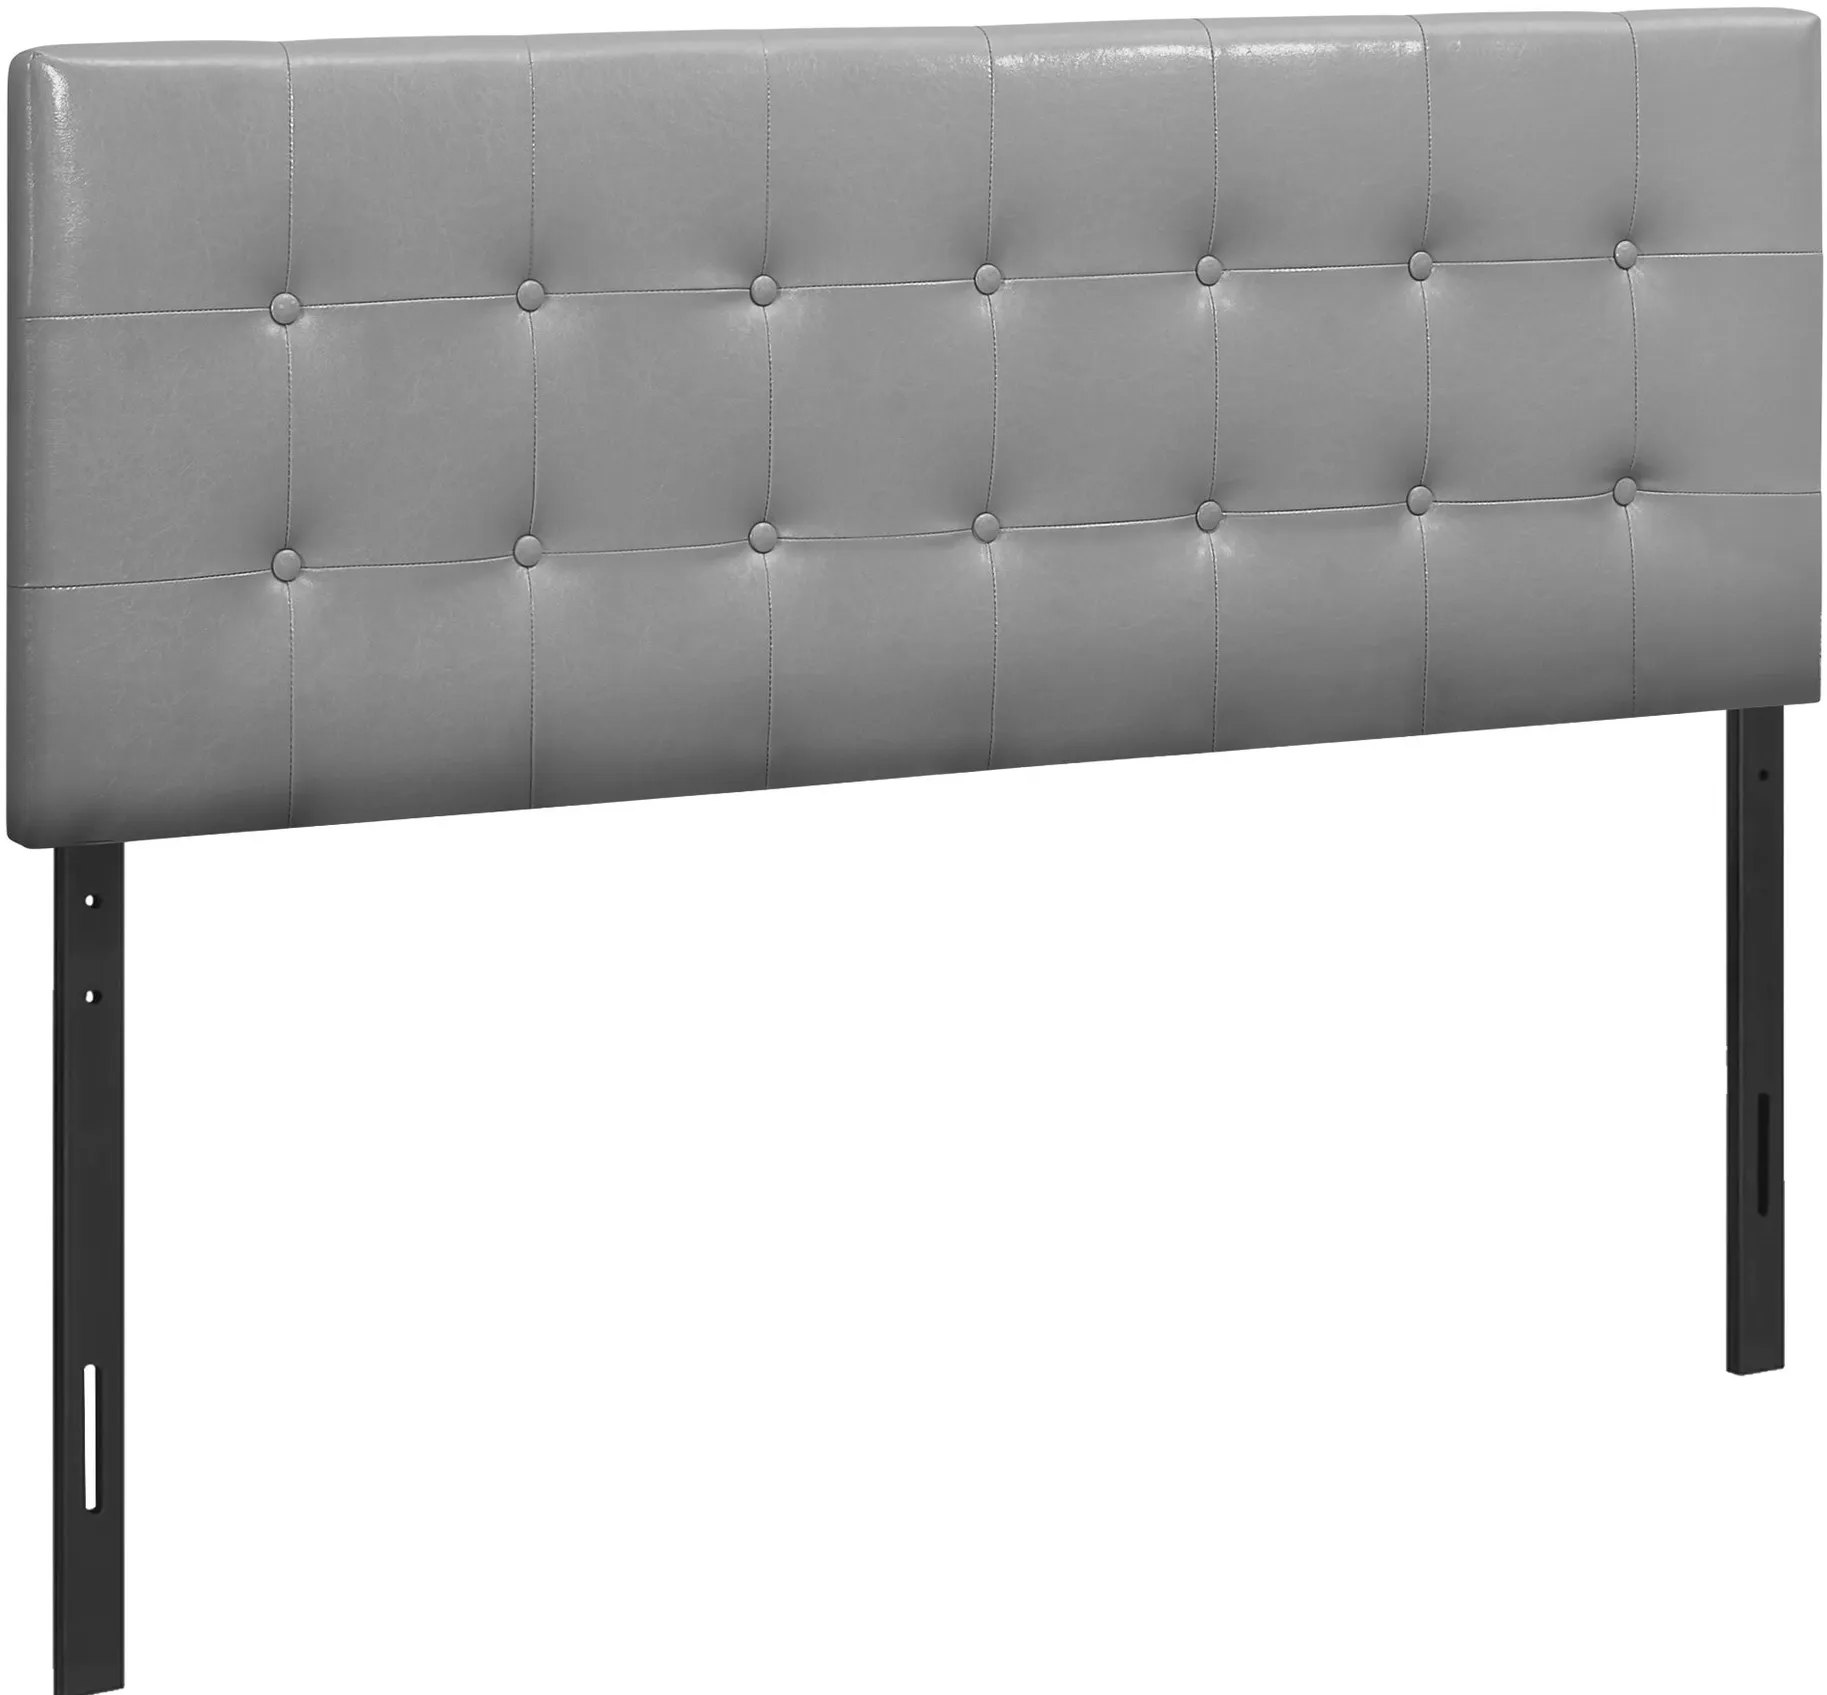 Bed, Headboard Only, Queen Size, Bedroom, Upholstered, Pu Leather Look, Grey, Transitional